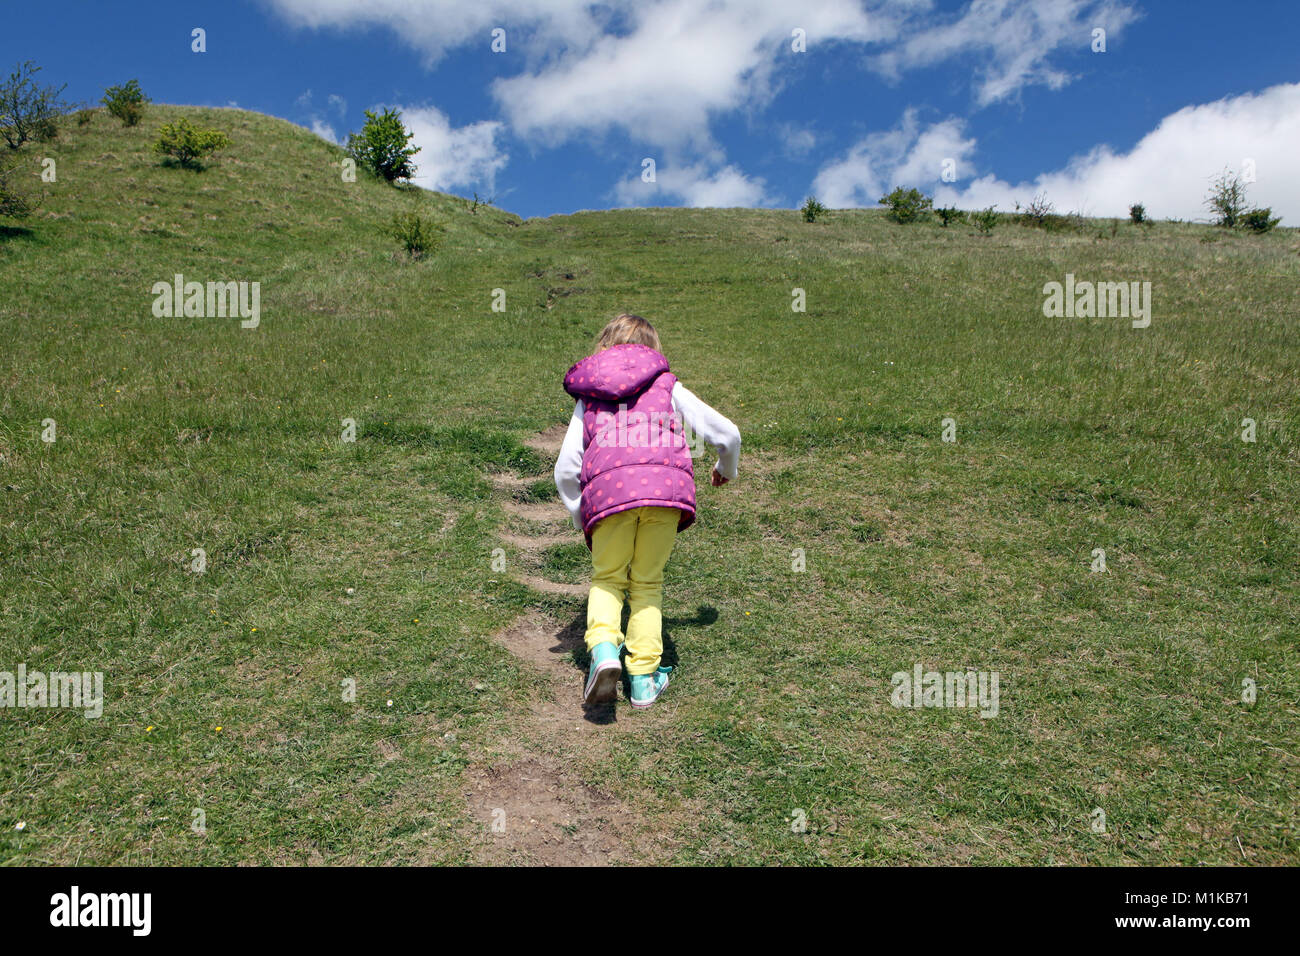 A colourful child runs up Cley Hill in Wiltshire UK. The hill near Longleat is a popular family walk. Stock Photo